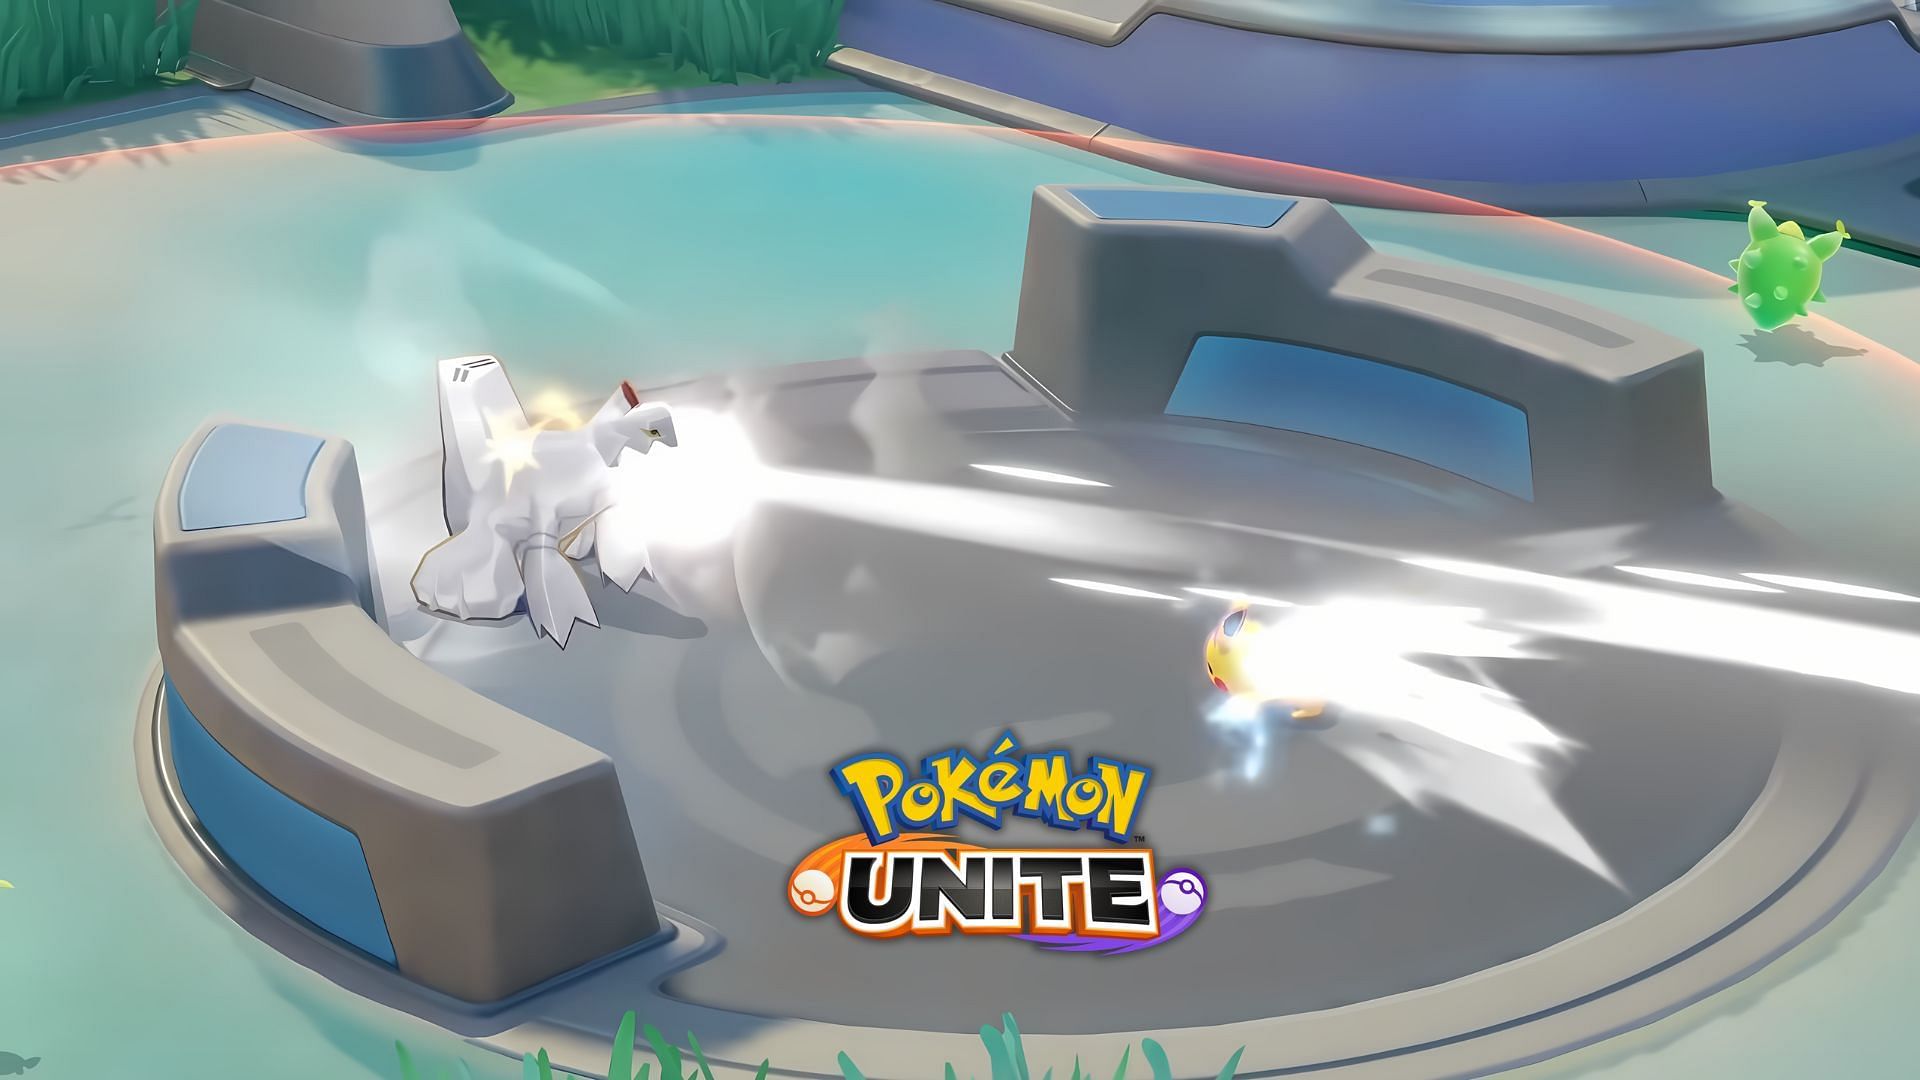 5 Licenses with the highest Lifesteal in Pokemon Unite